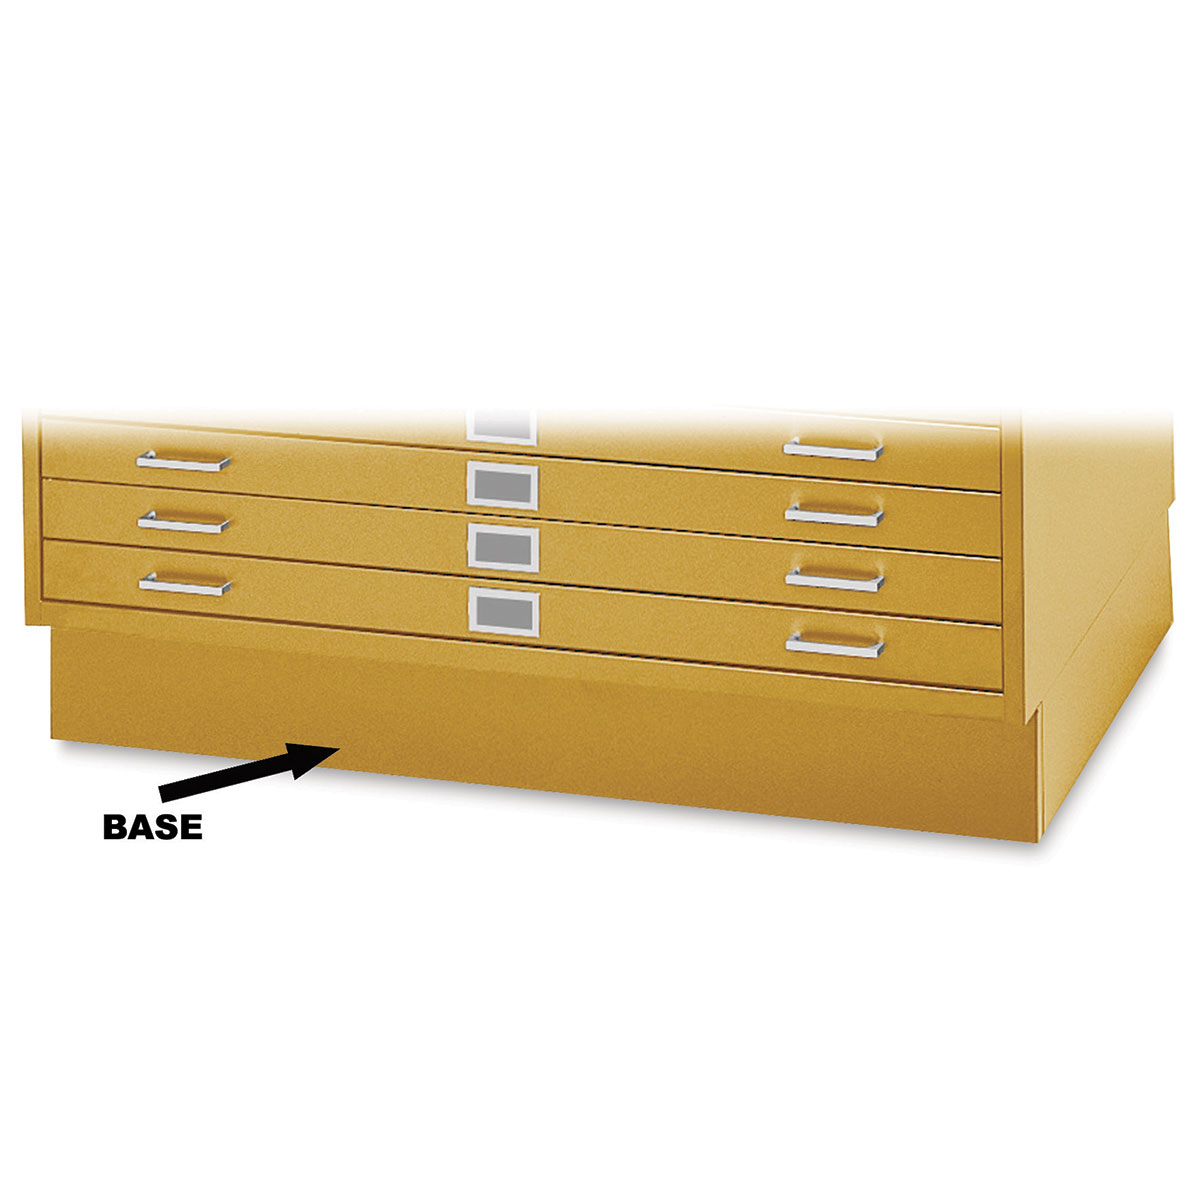 Safco Steel Flat File - Pot of Gold, Base, Small